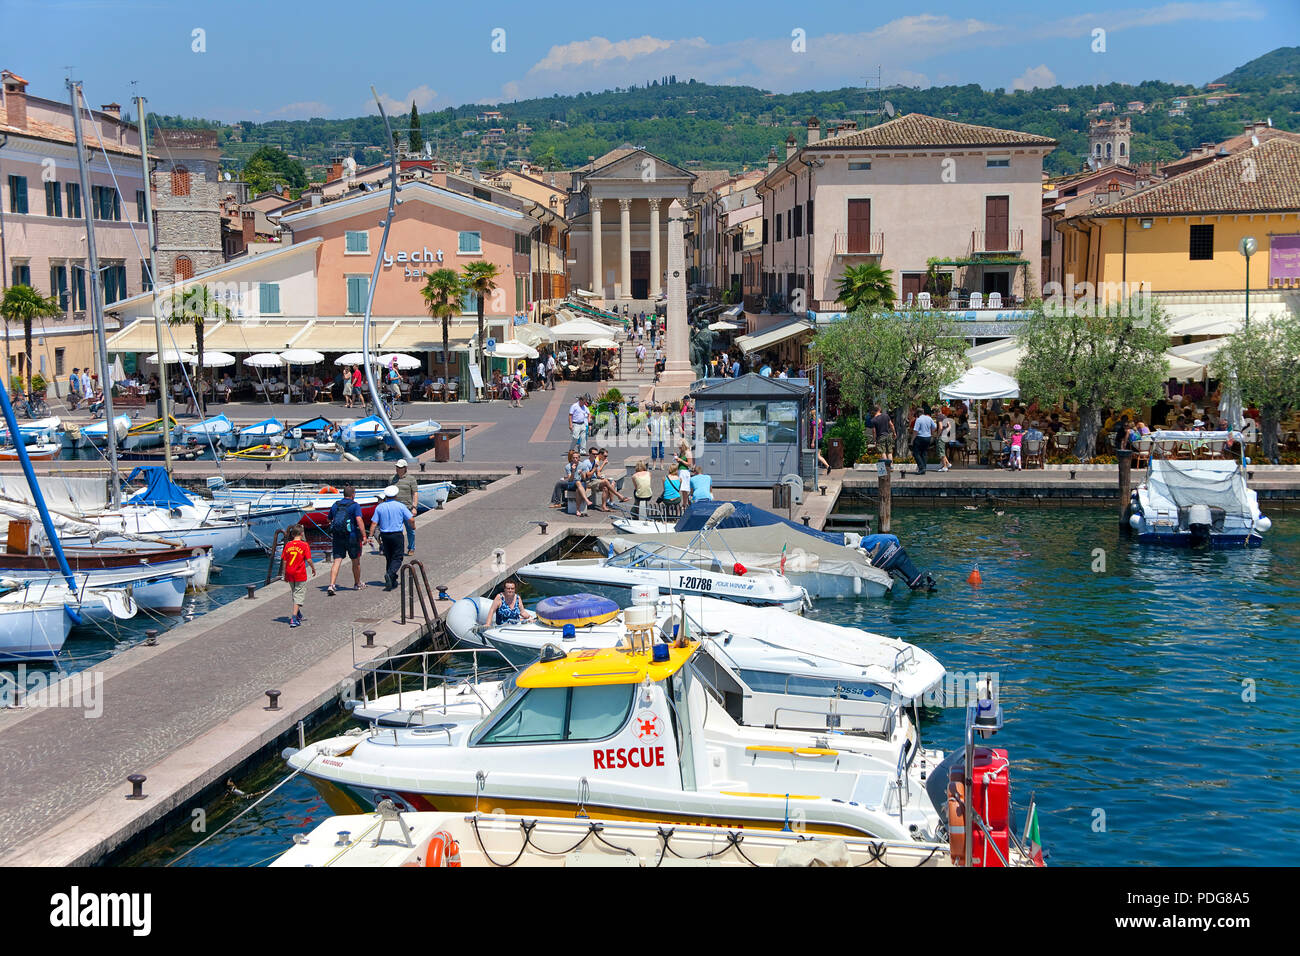 Bardolino High Resolution Stock Photography And Images Alamy